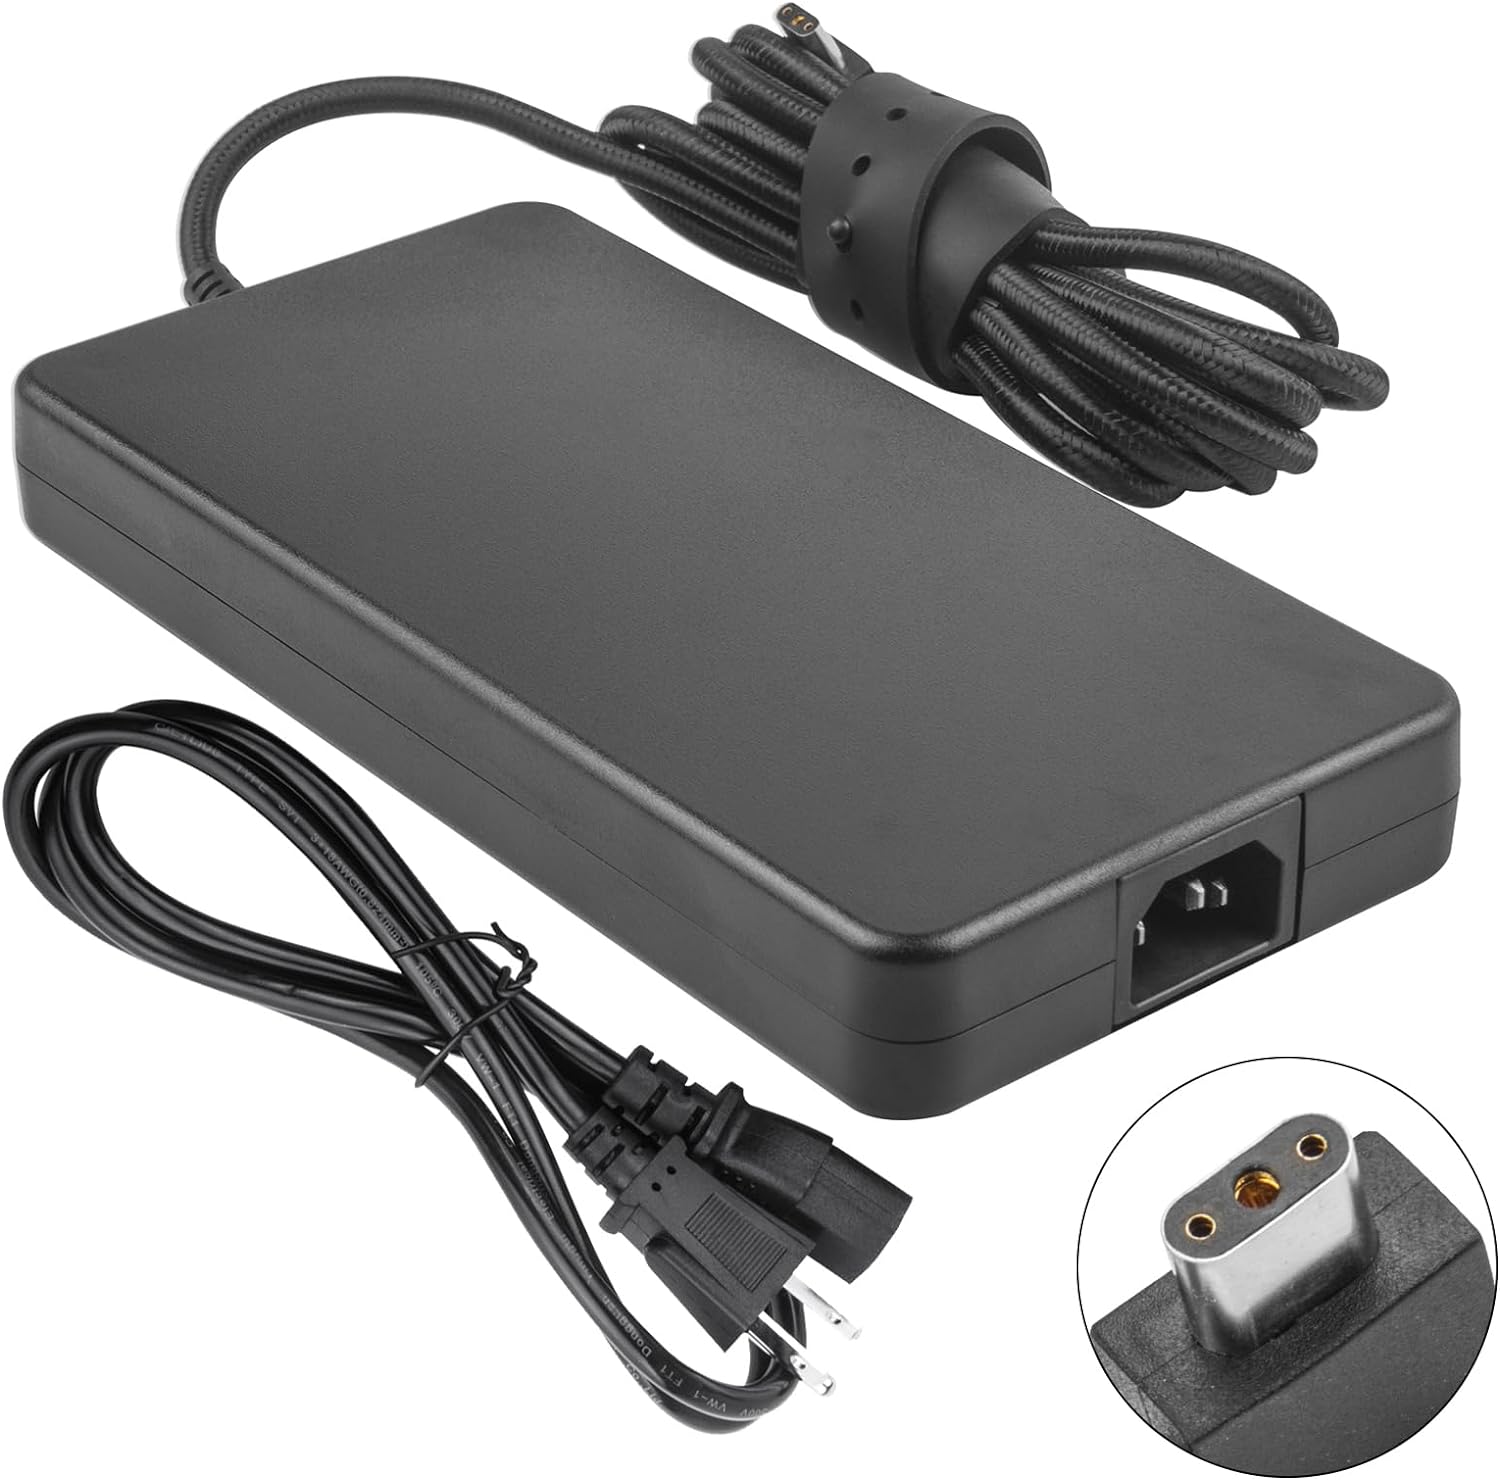 230W 19.5V 11.8A Razer Blade Charger, 3-Prong AC Adapter Compatible with Razer Blade Pro 17 Razer Blade 15 Connectivity